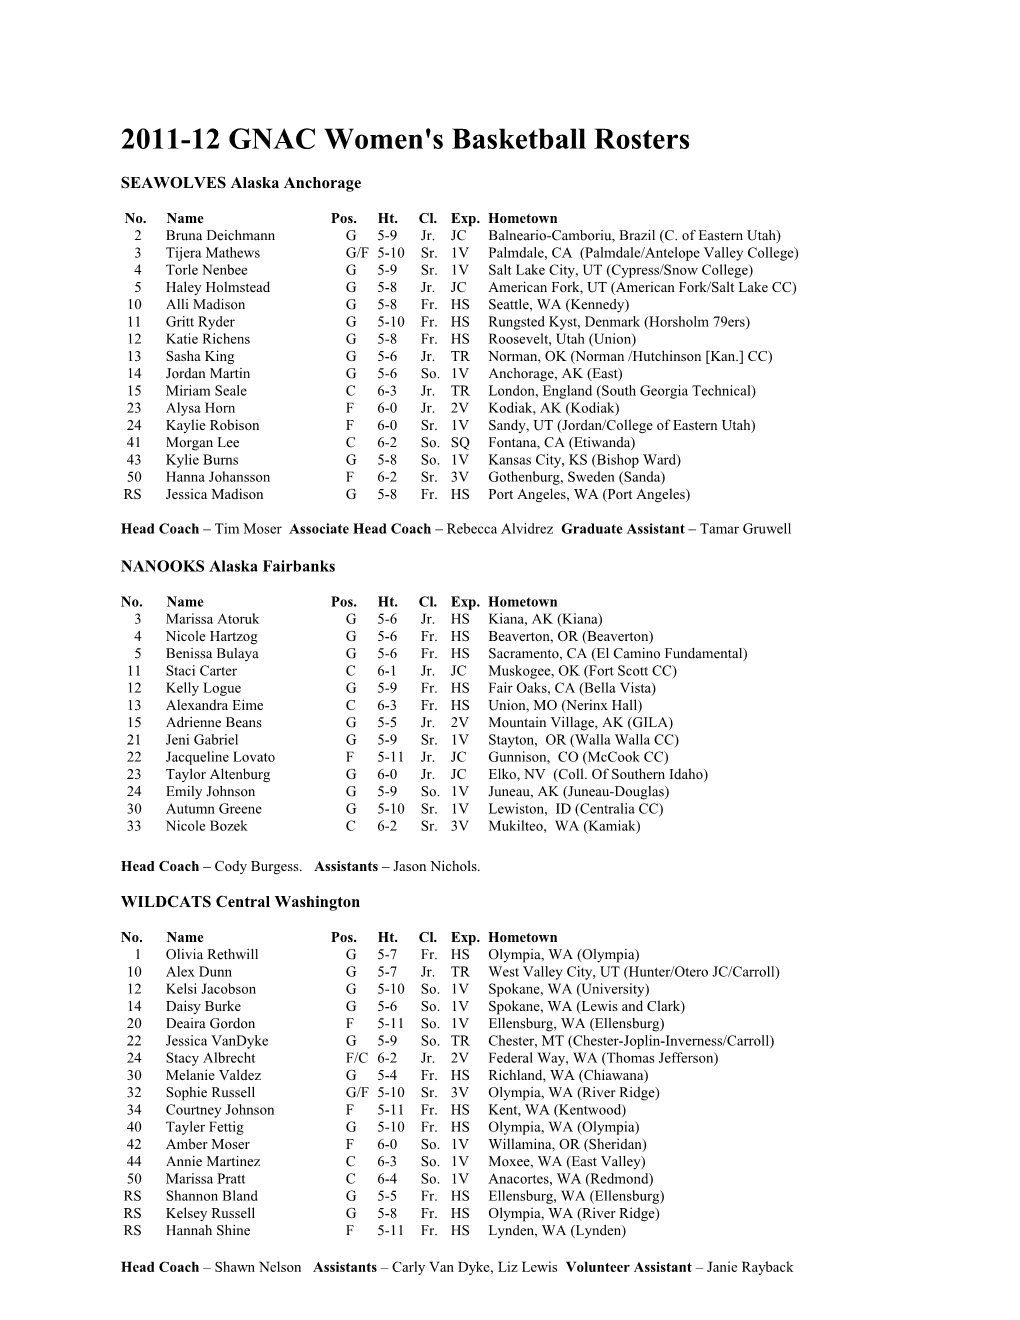 2001-02 GNAC Women's Basketball Rosters